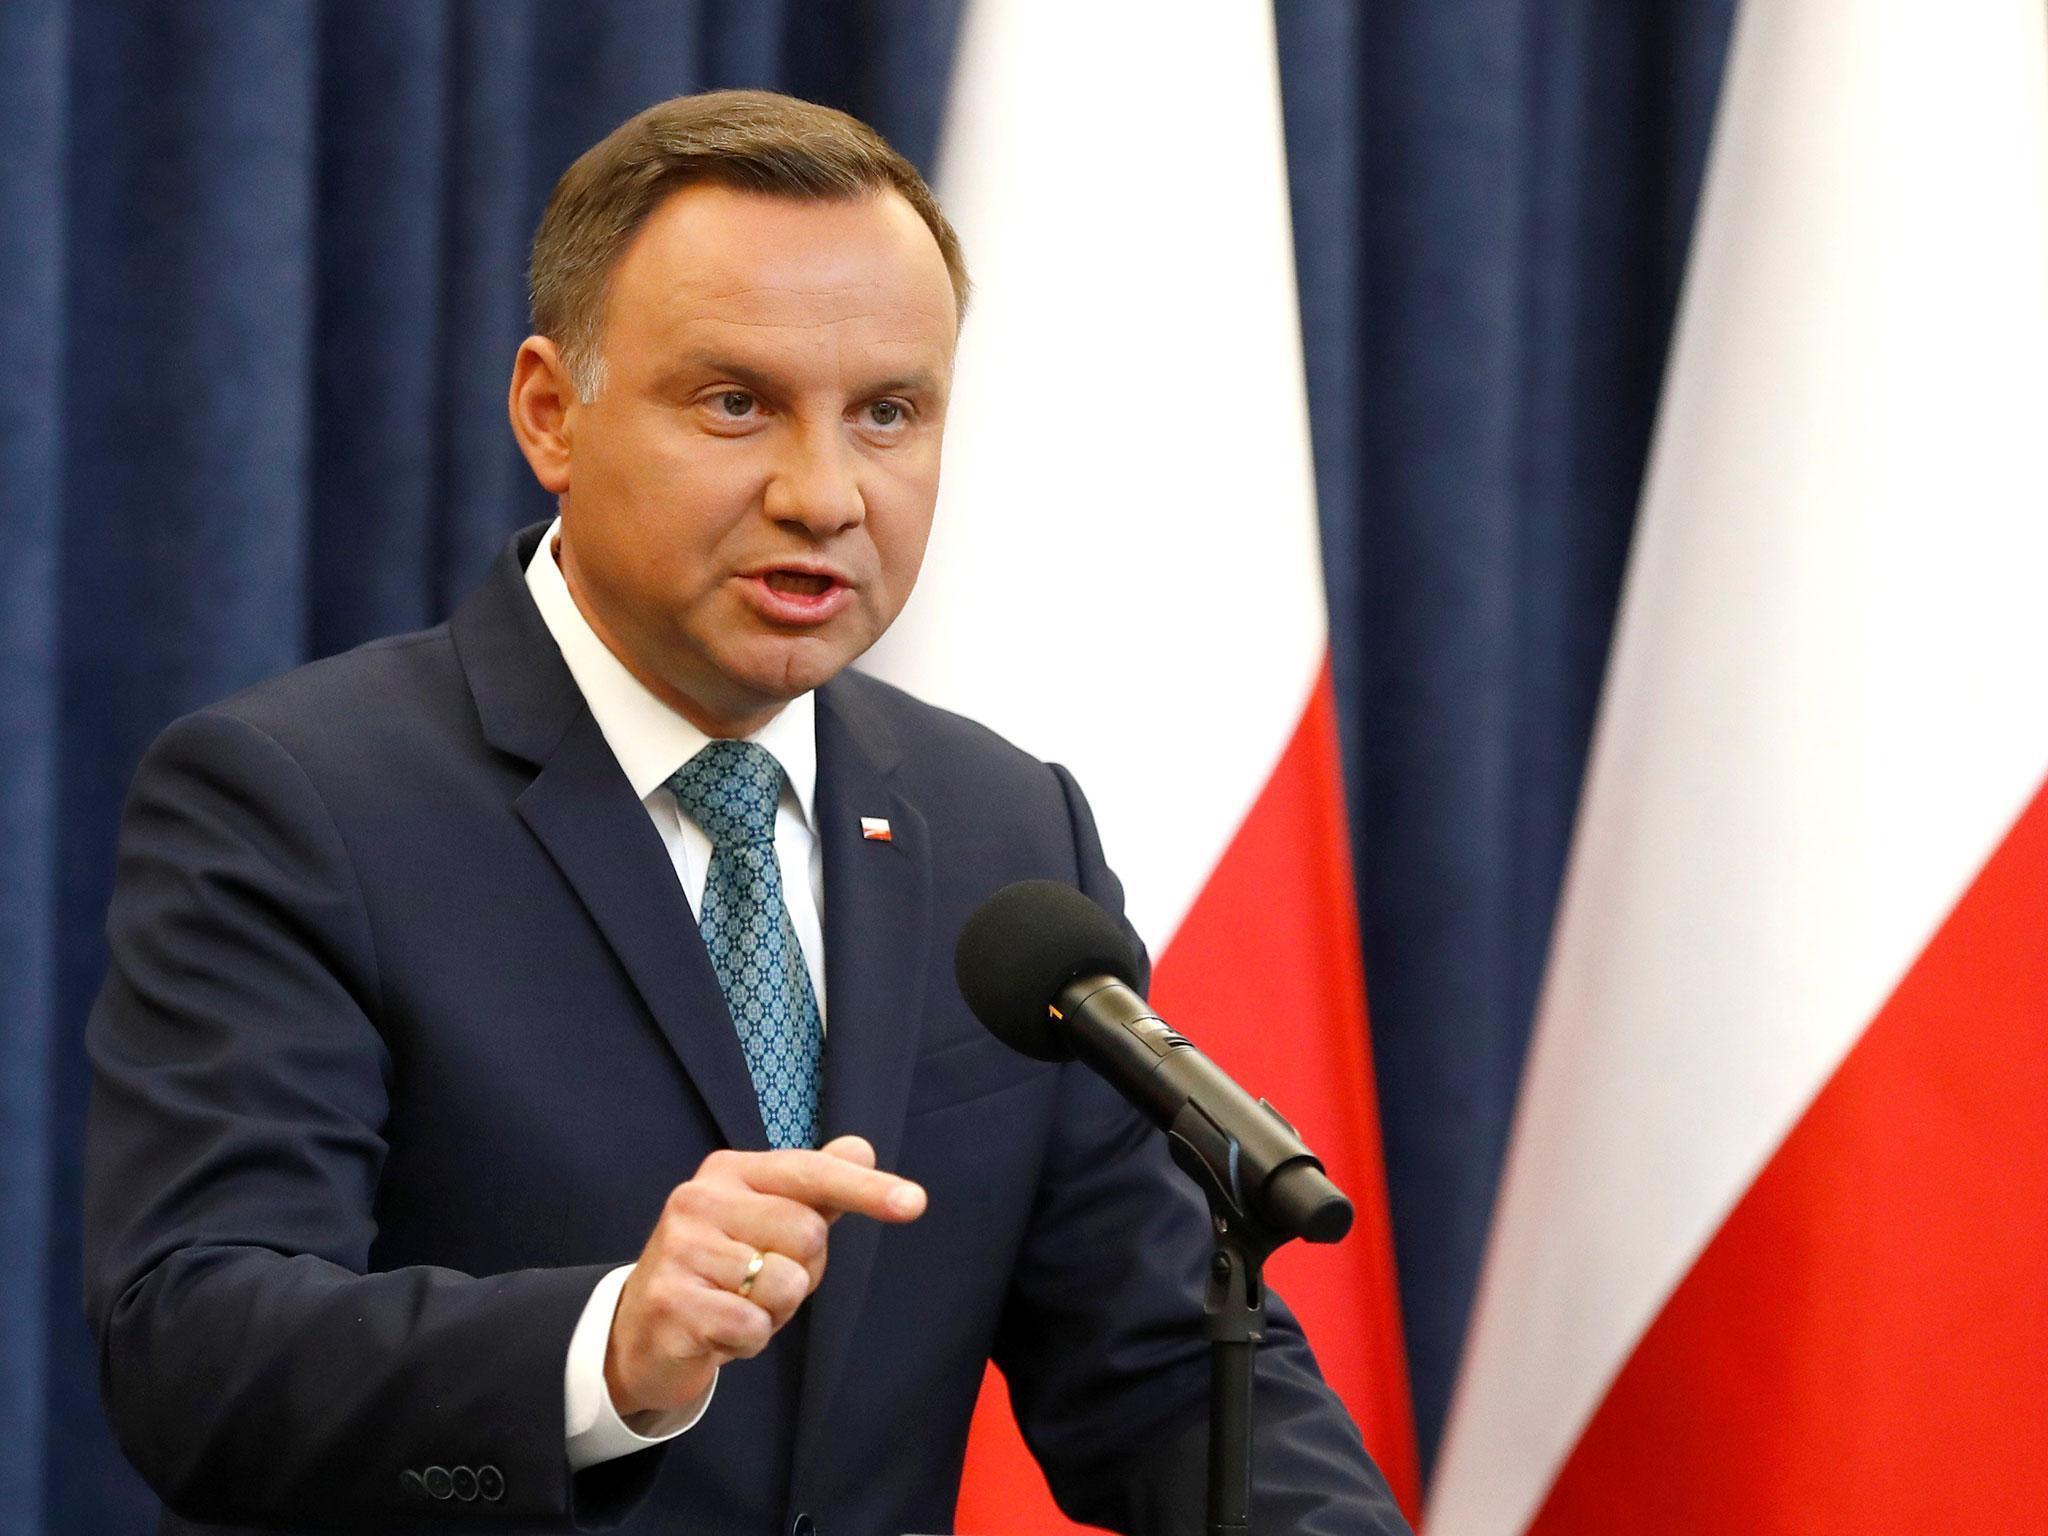 Andrzej Duda, President of Poland, says a prosecutor general should not have the power to appoint judges